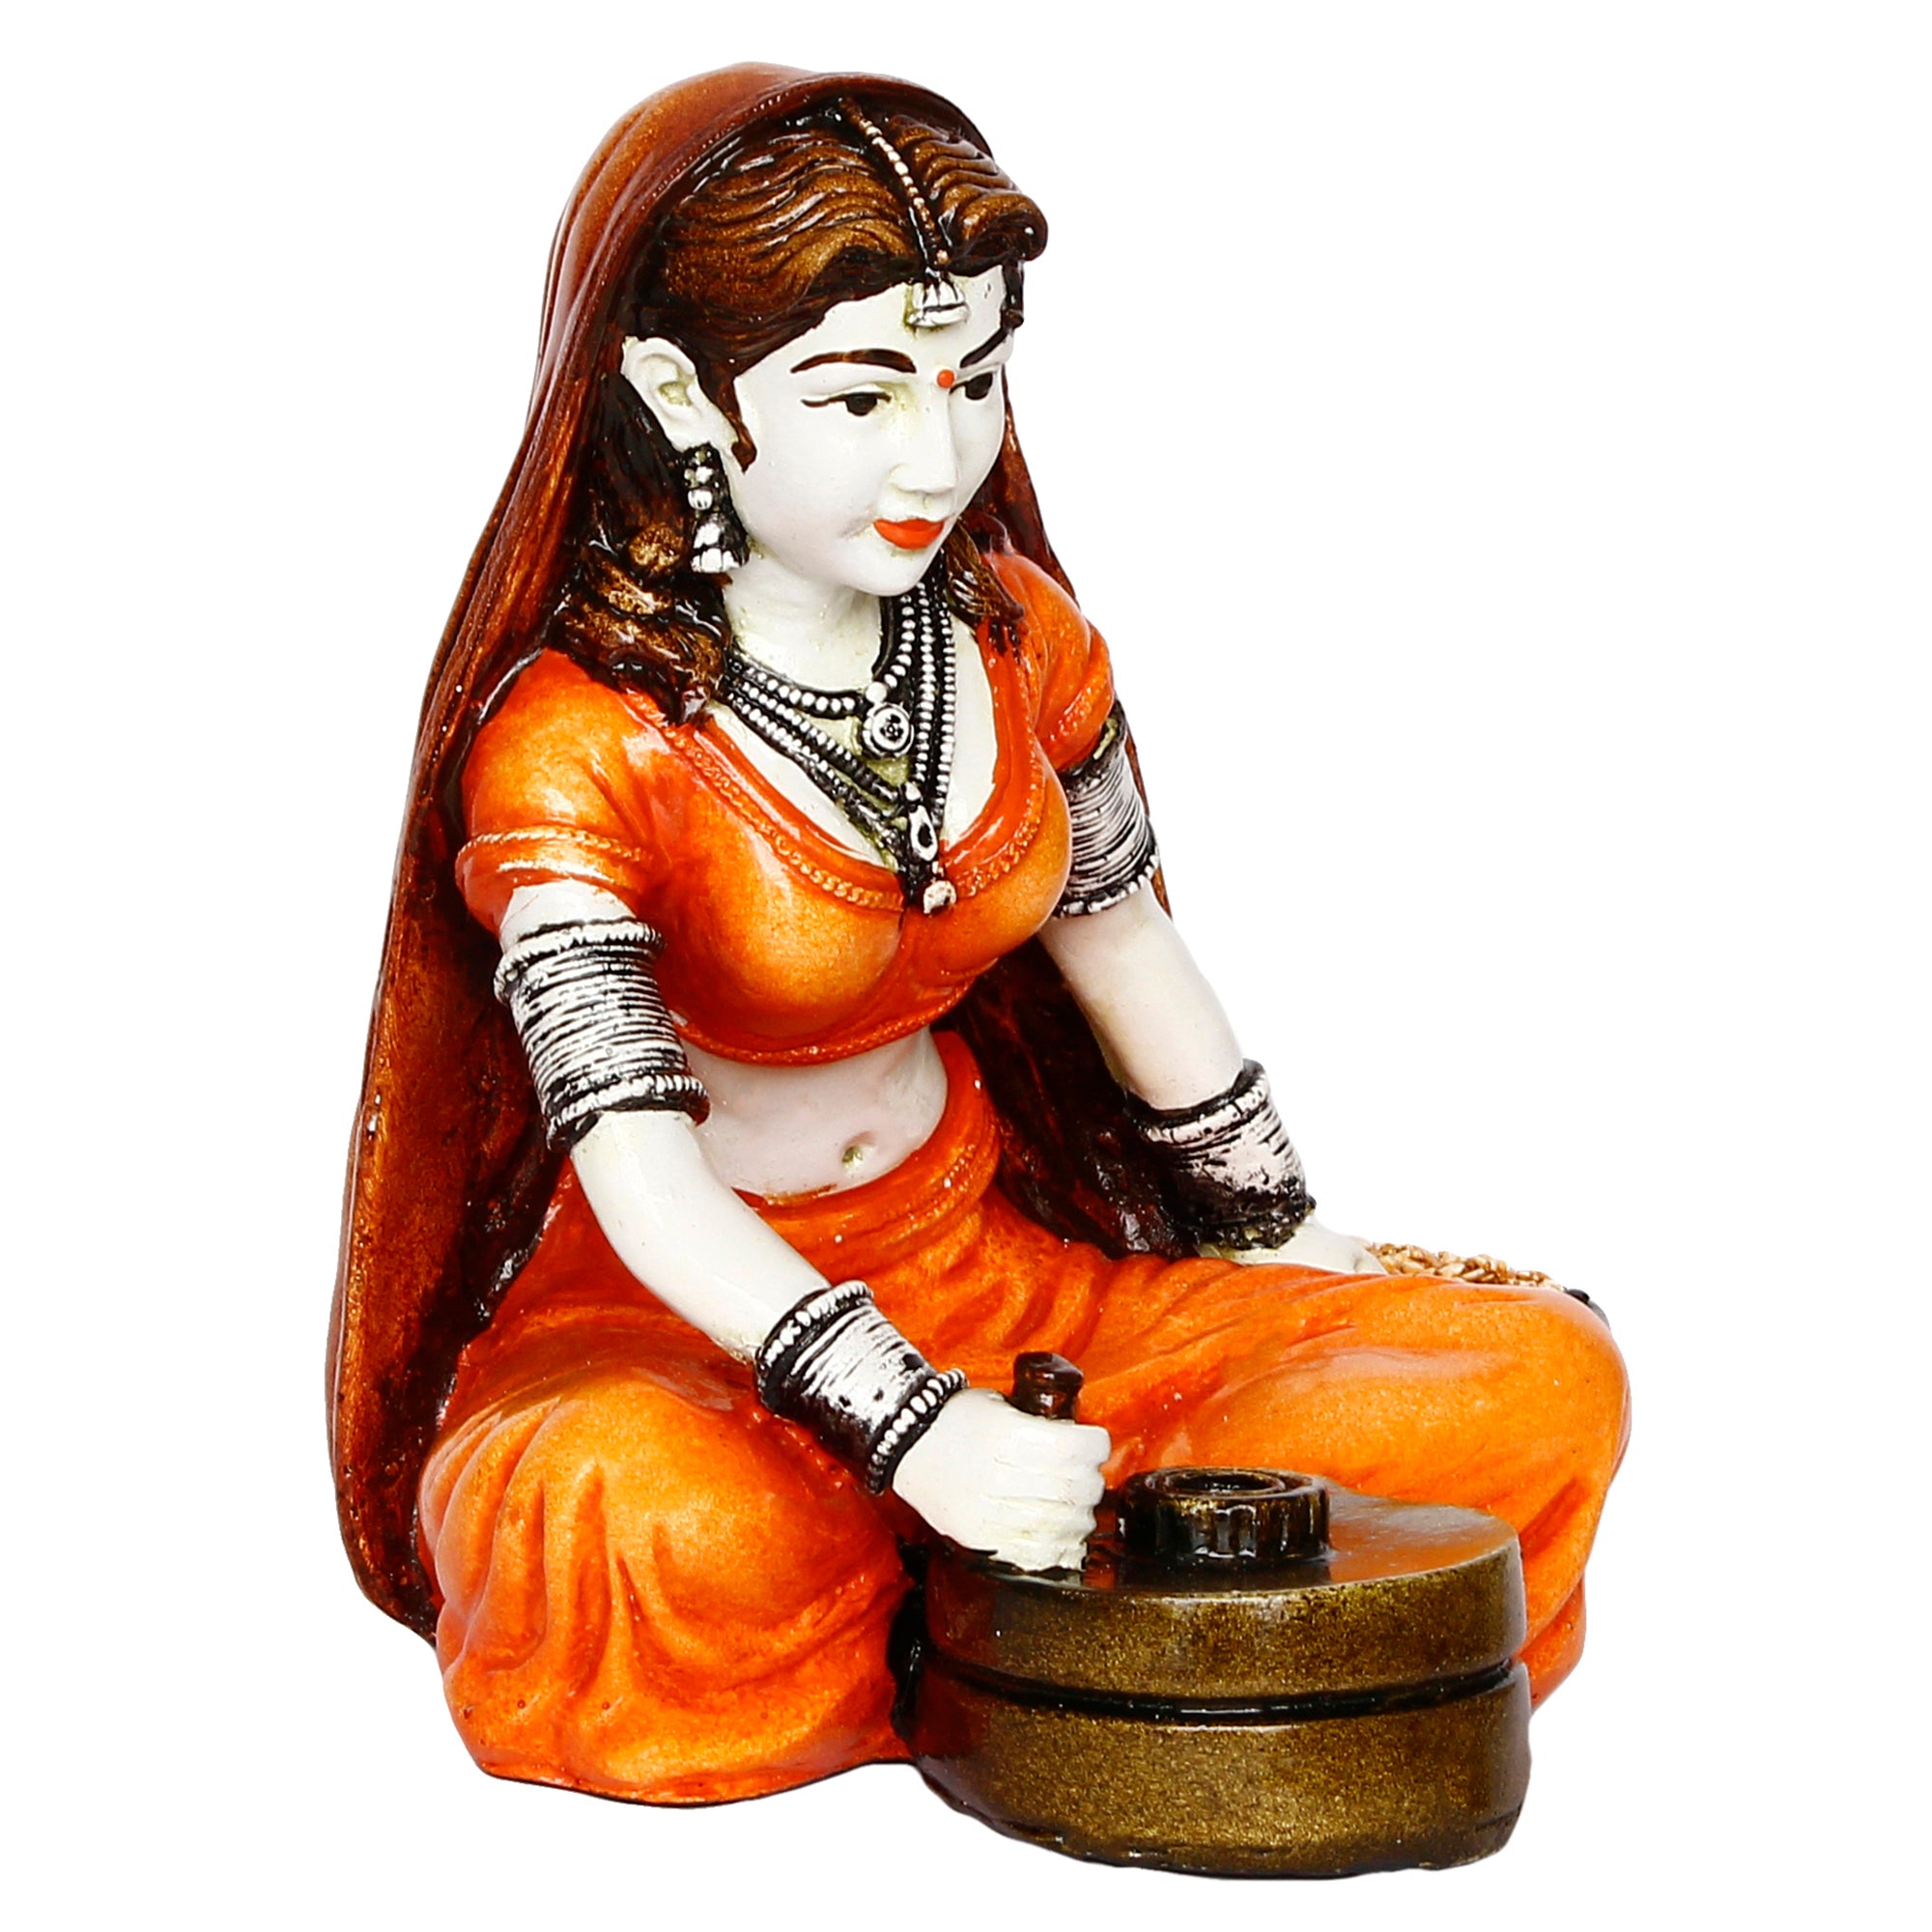 Polyresin Rajasthani Women Statue Using Traditional Flour Mill Handcrafted Human Figurine Decorative Showpiece 5